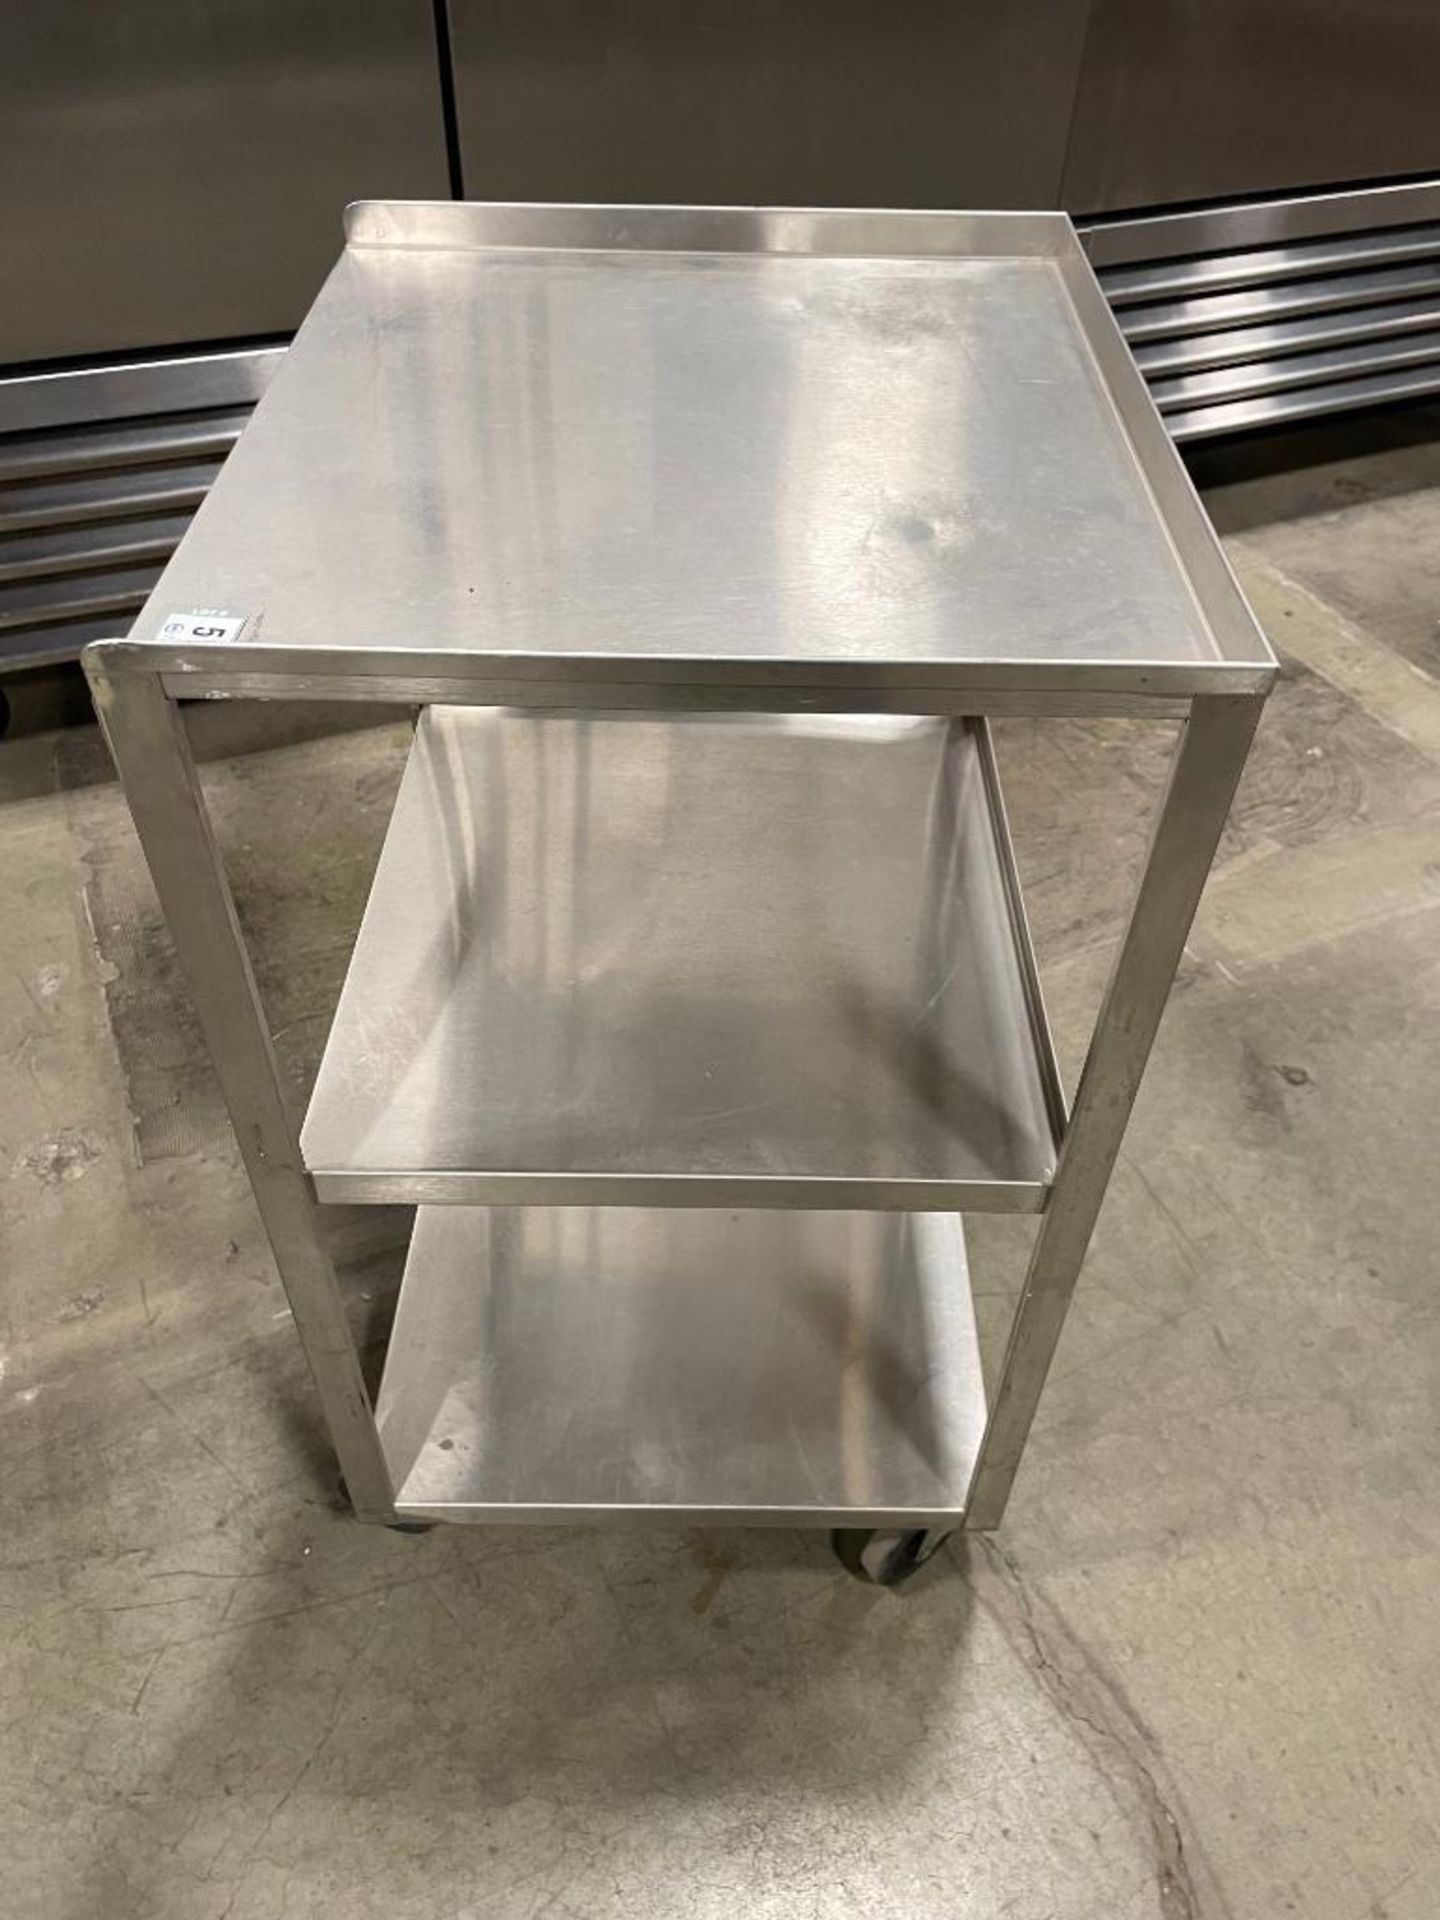 3 TIER STAINLESS STEEL UTILITY CART - Image 3 of 4